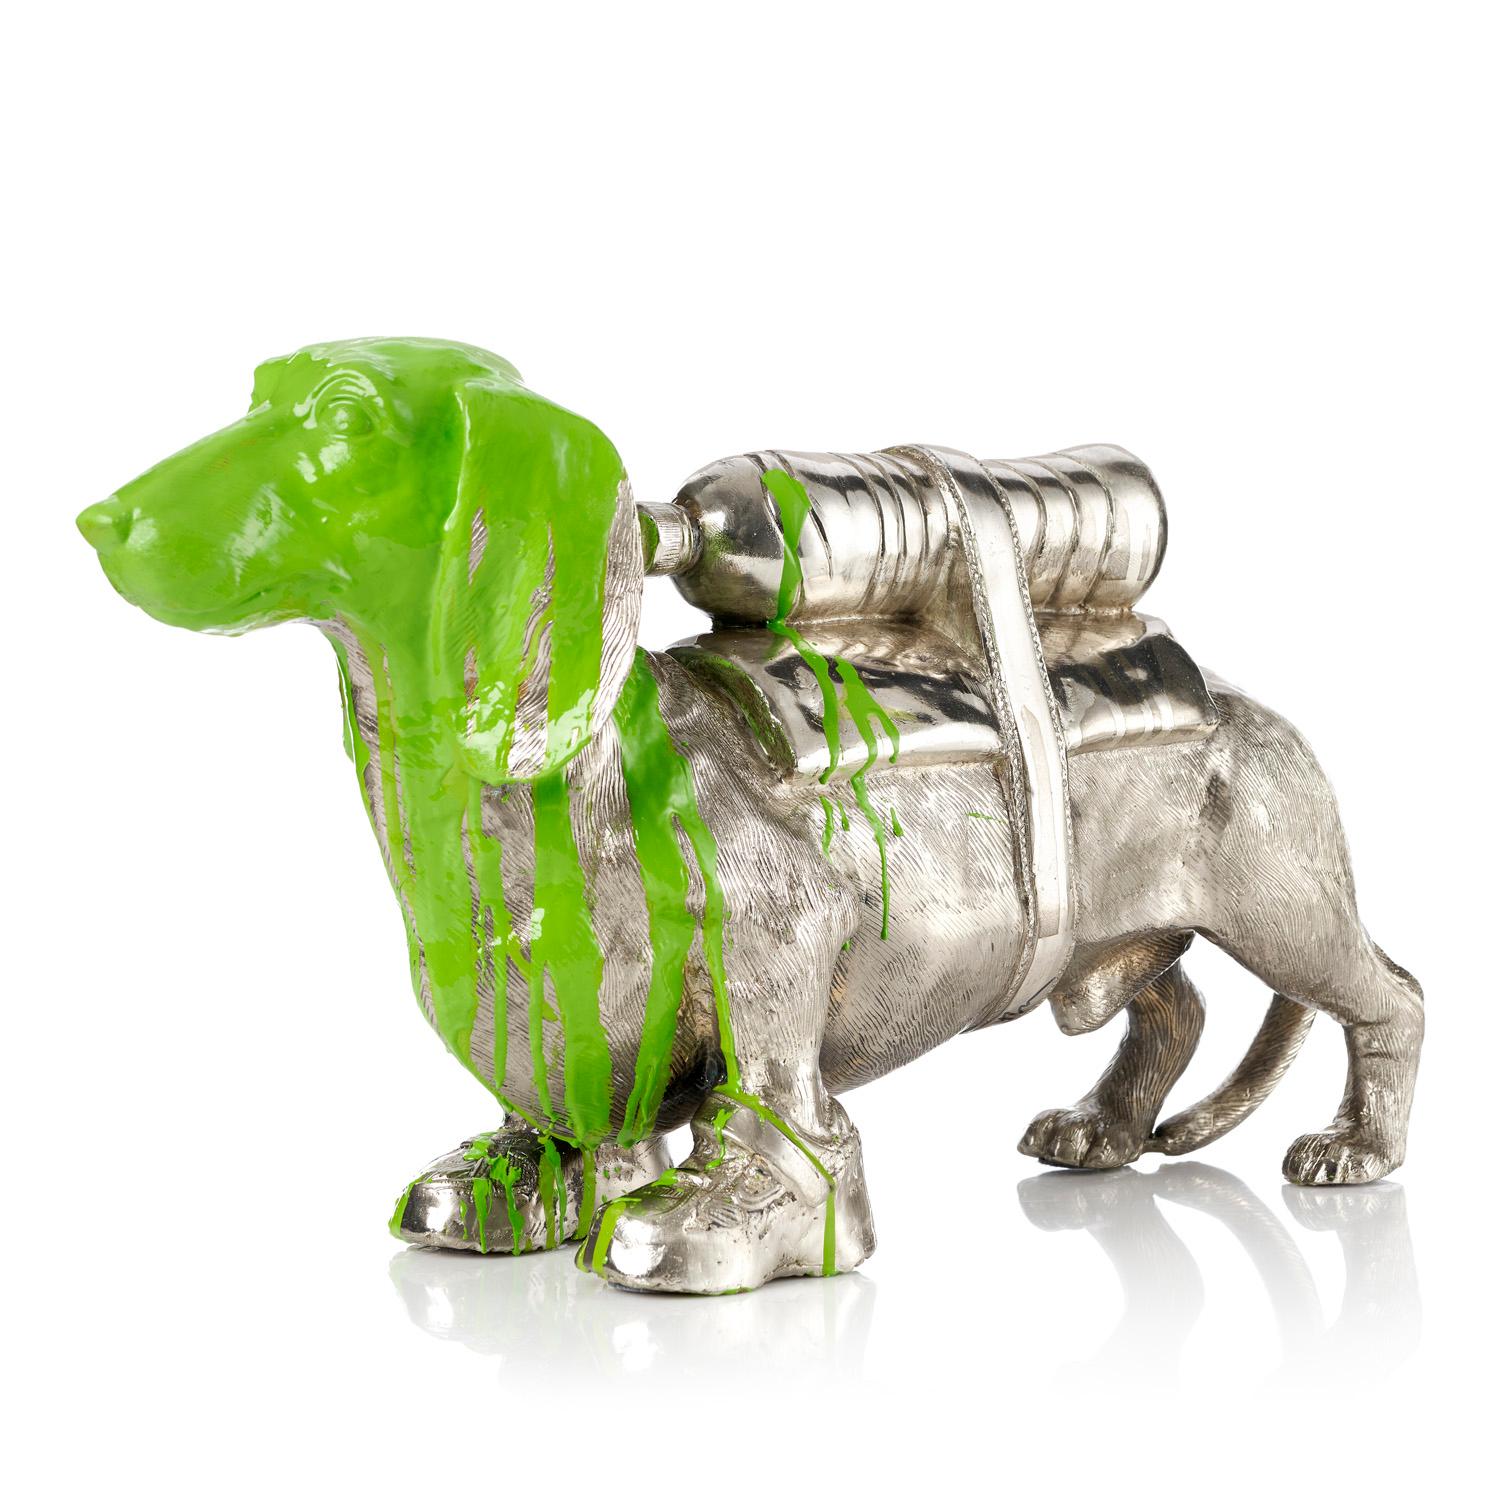 Cloned Dachshund with pet bottle (green) - Sculpture by William Sweetlove